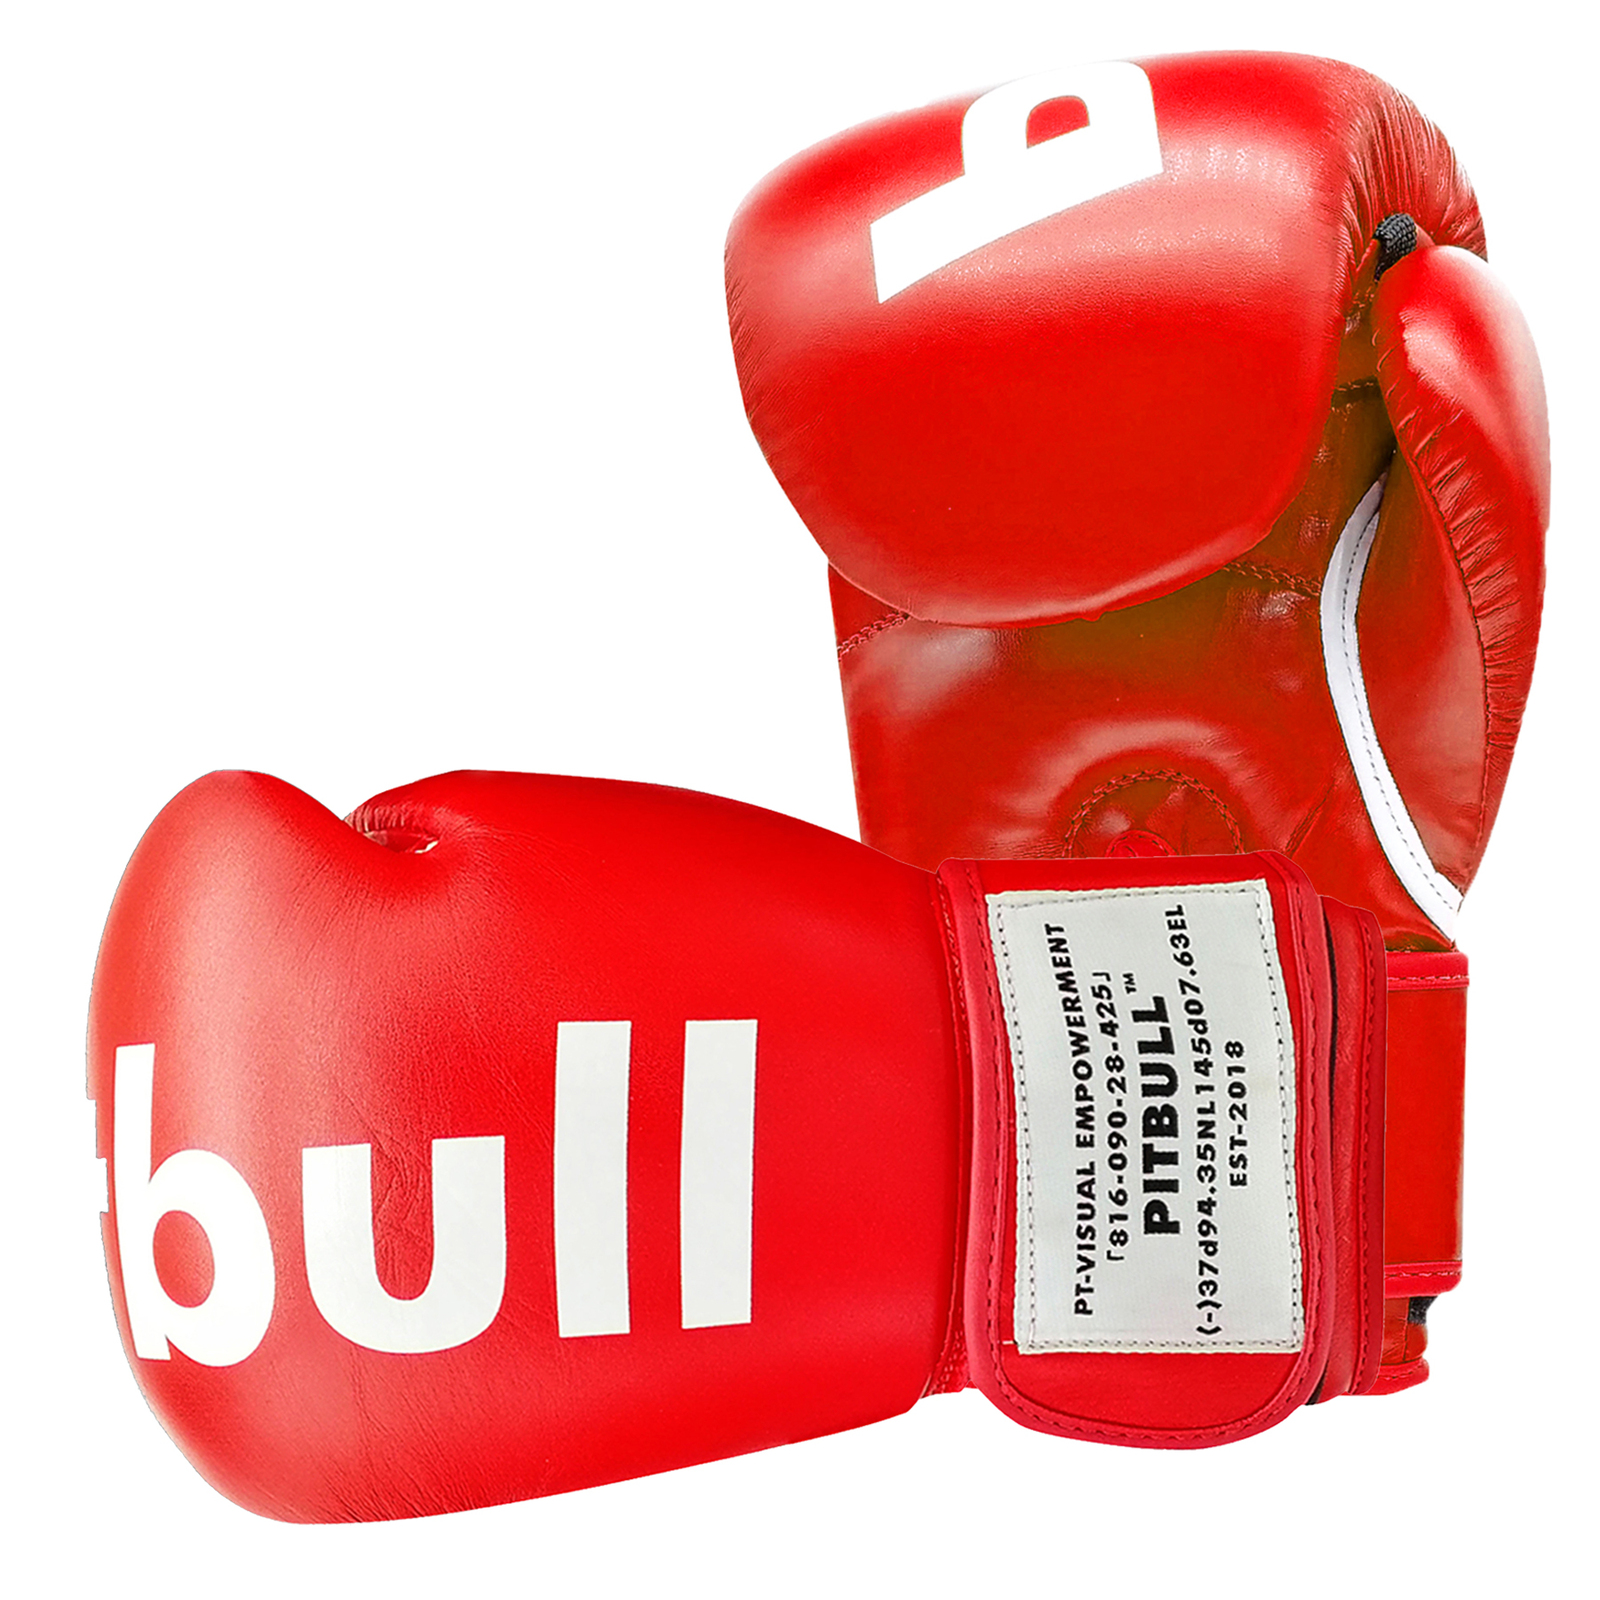 PITBULL Leather Boxing Gloves MMA Grappling Training UFC Fight Punch ...